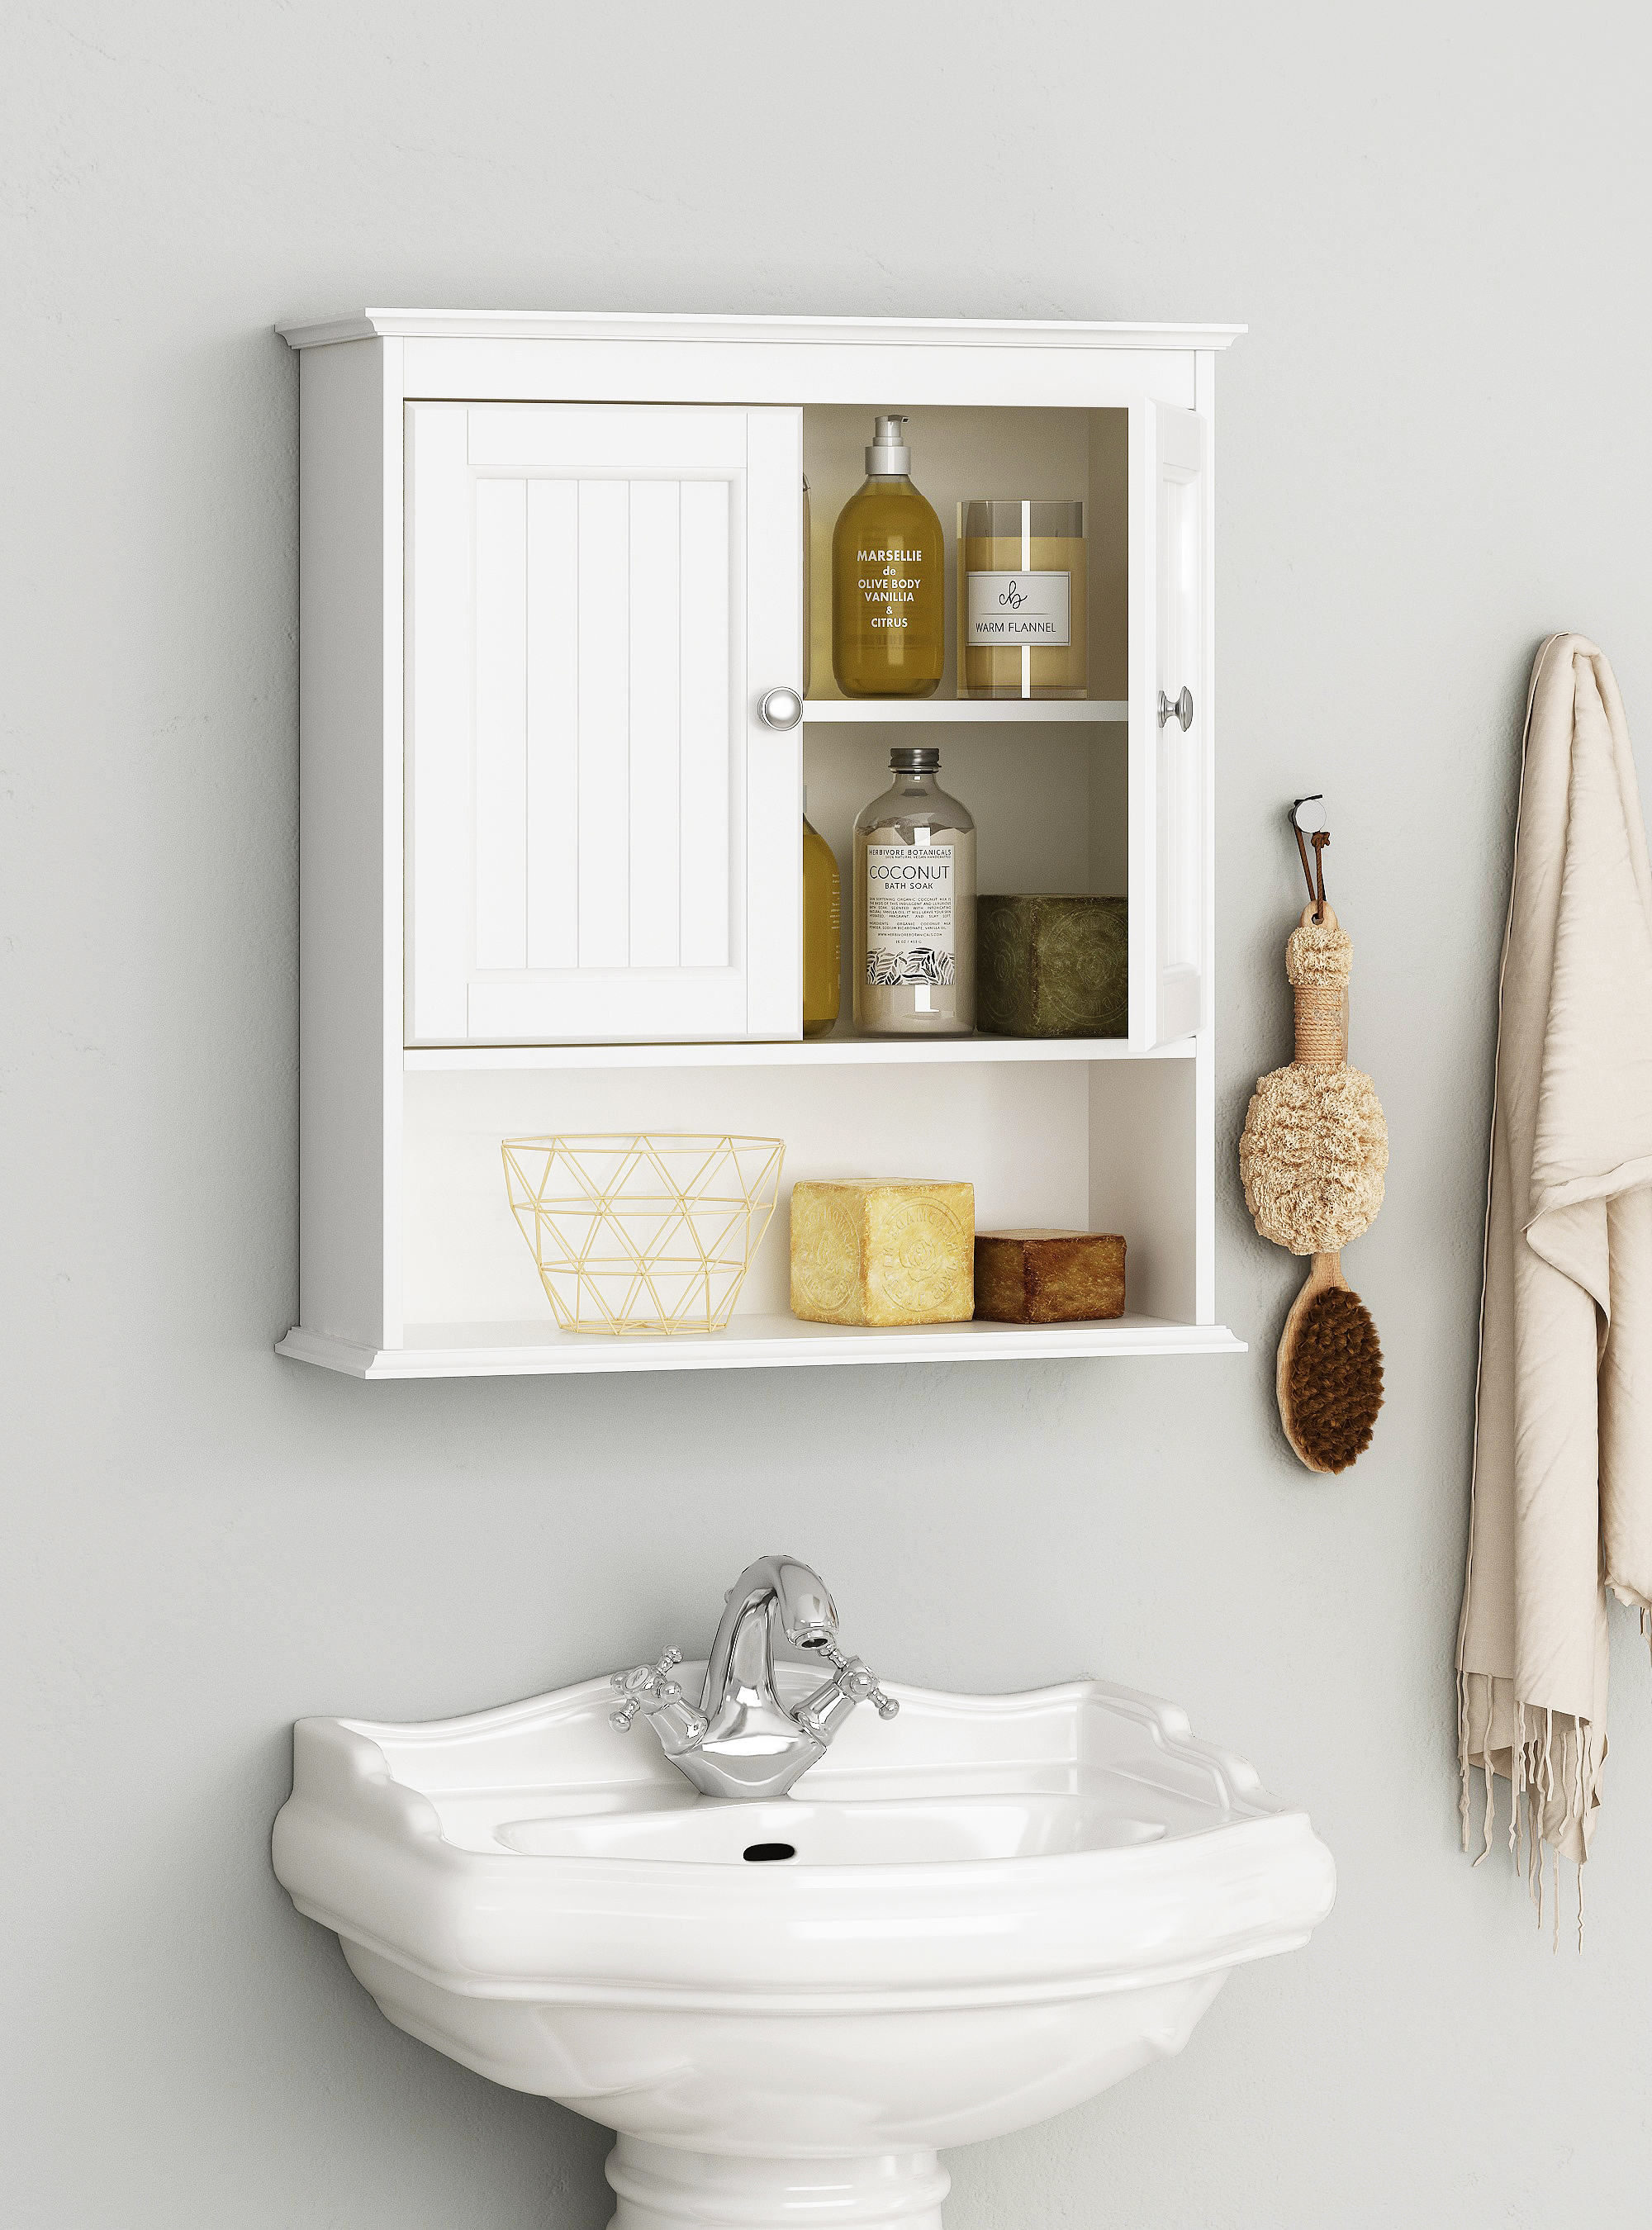 Spirich Home Bathroom Cabinet Wall Mounted with Doors, Wood Hanging Cabinet, Wall Cabinets with Doors and Shelves Over The Toilet, Bathroom Wall Cabinet White - image 1 of 6